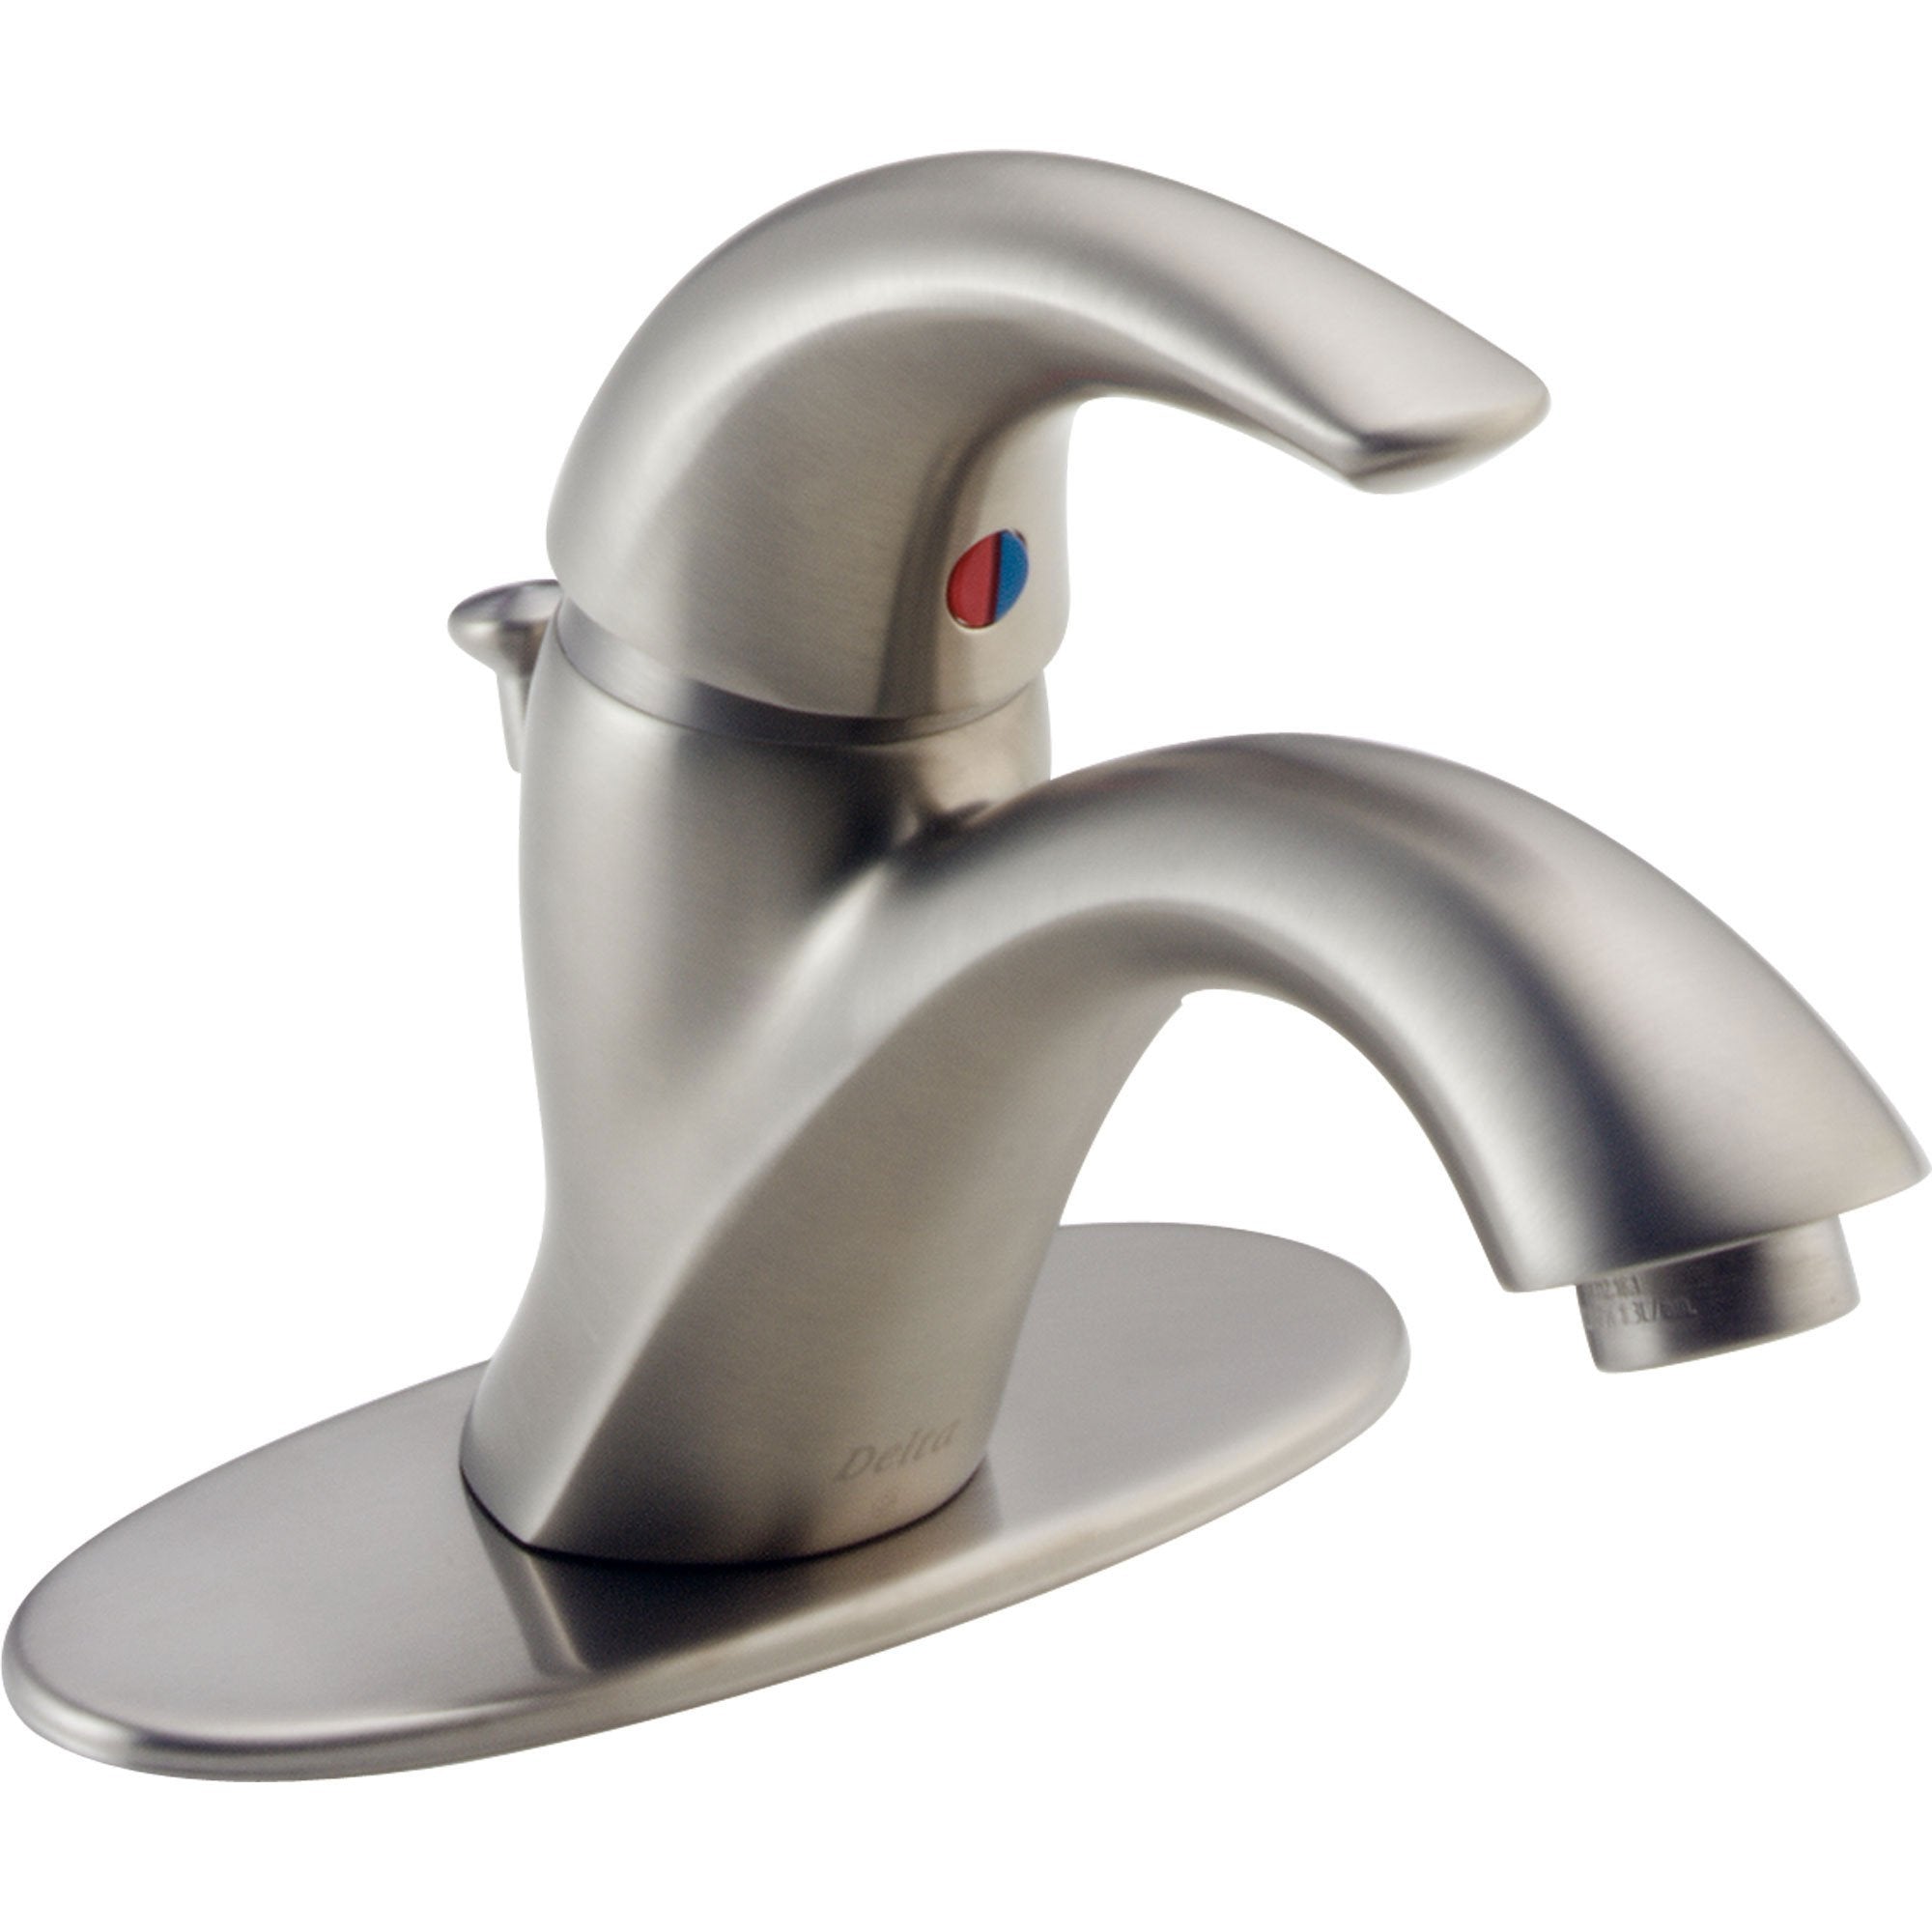 Delta Classic Single Handle Mid Arc Bathroom Faucet in Stainless Steel 474294